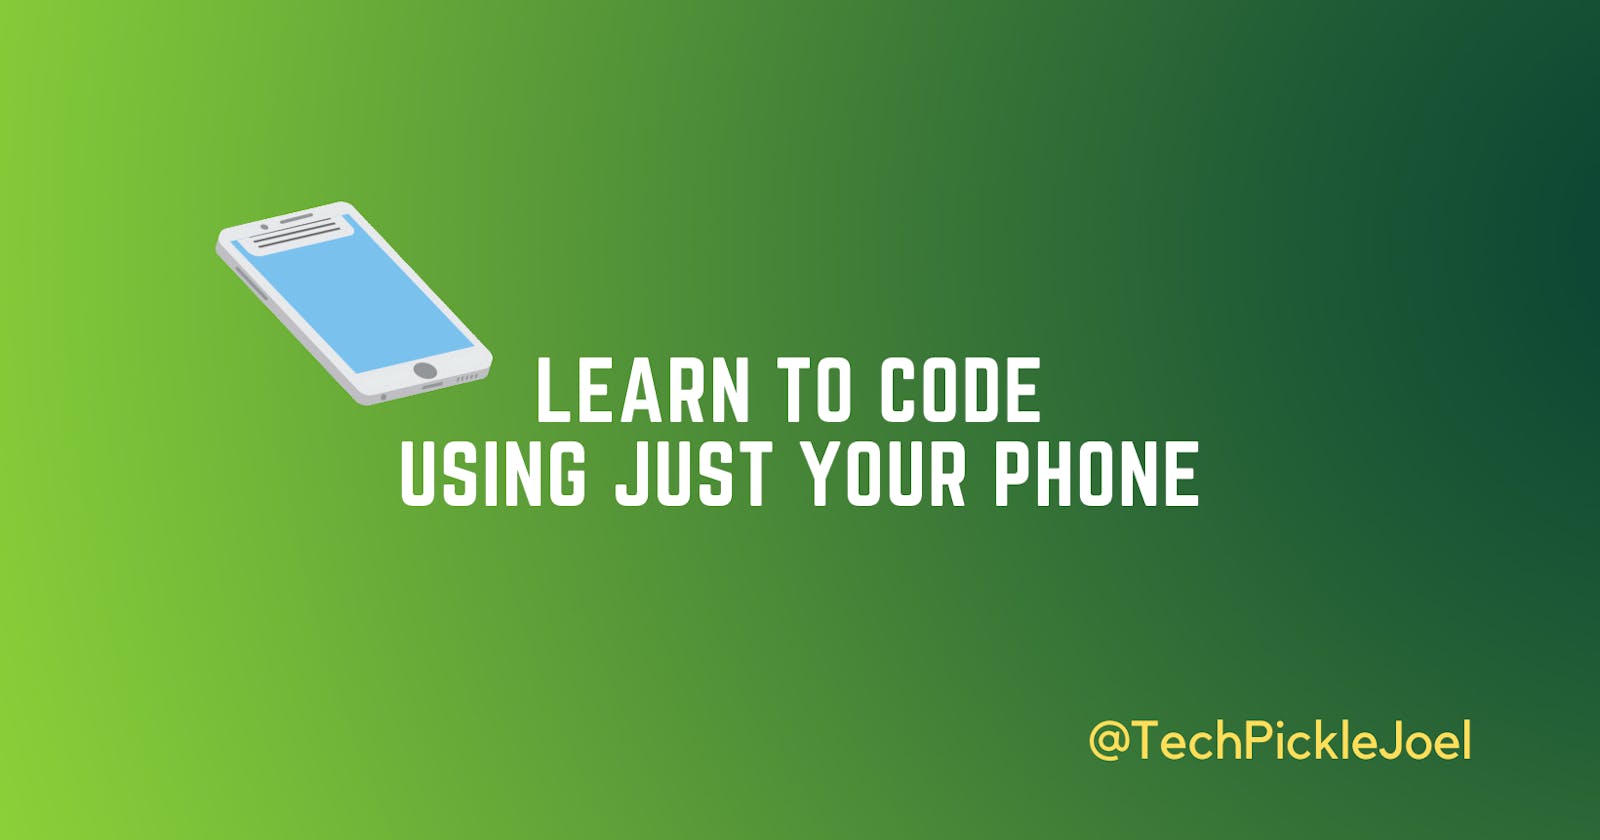 Learn to code using just your phone